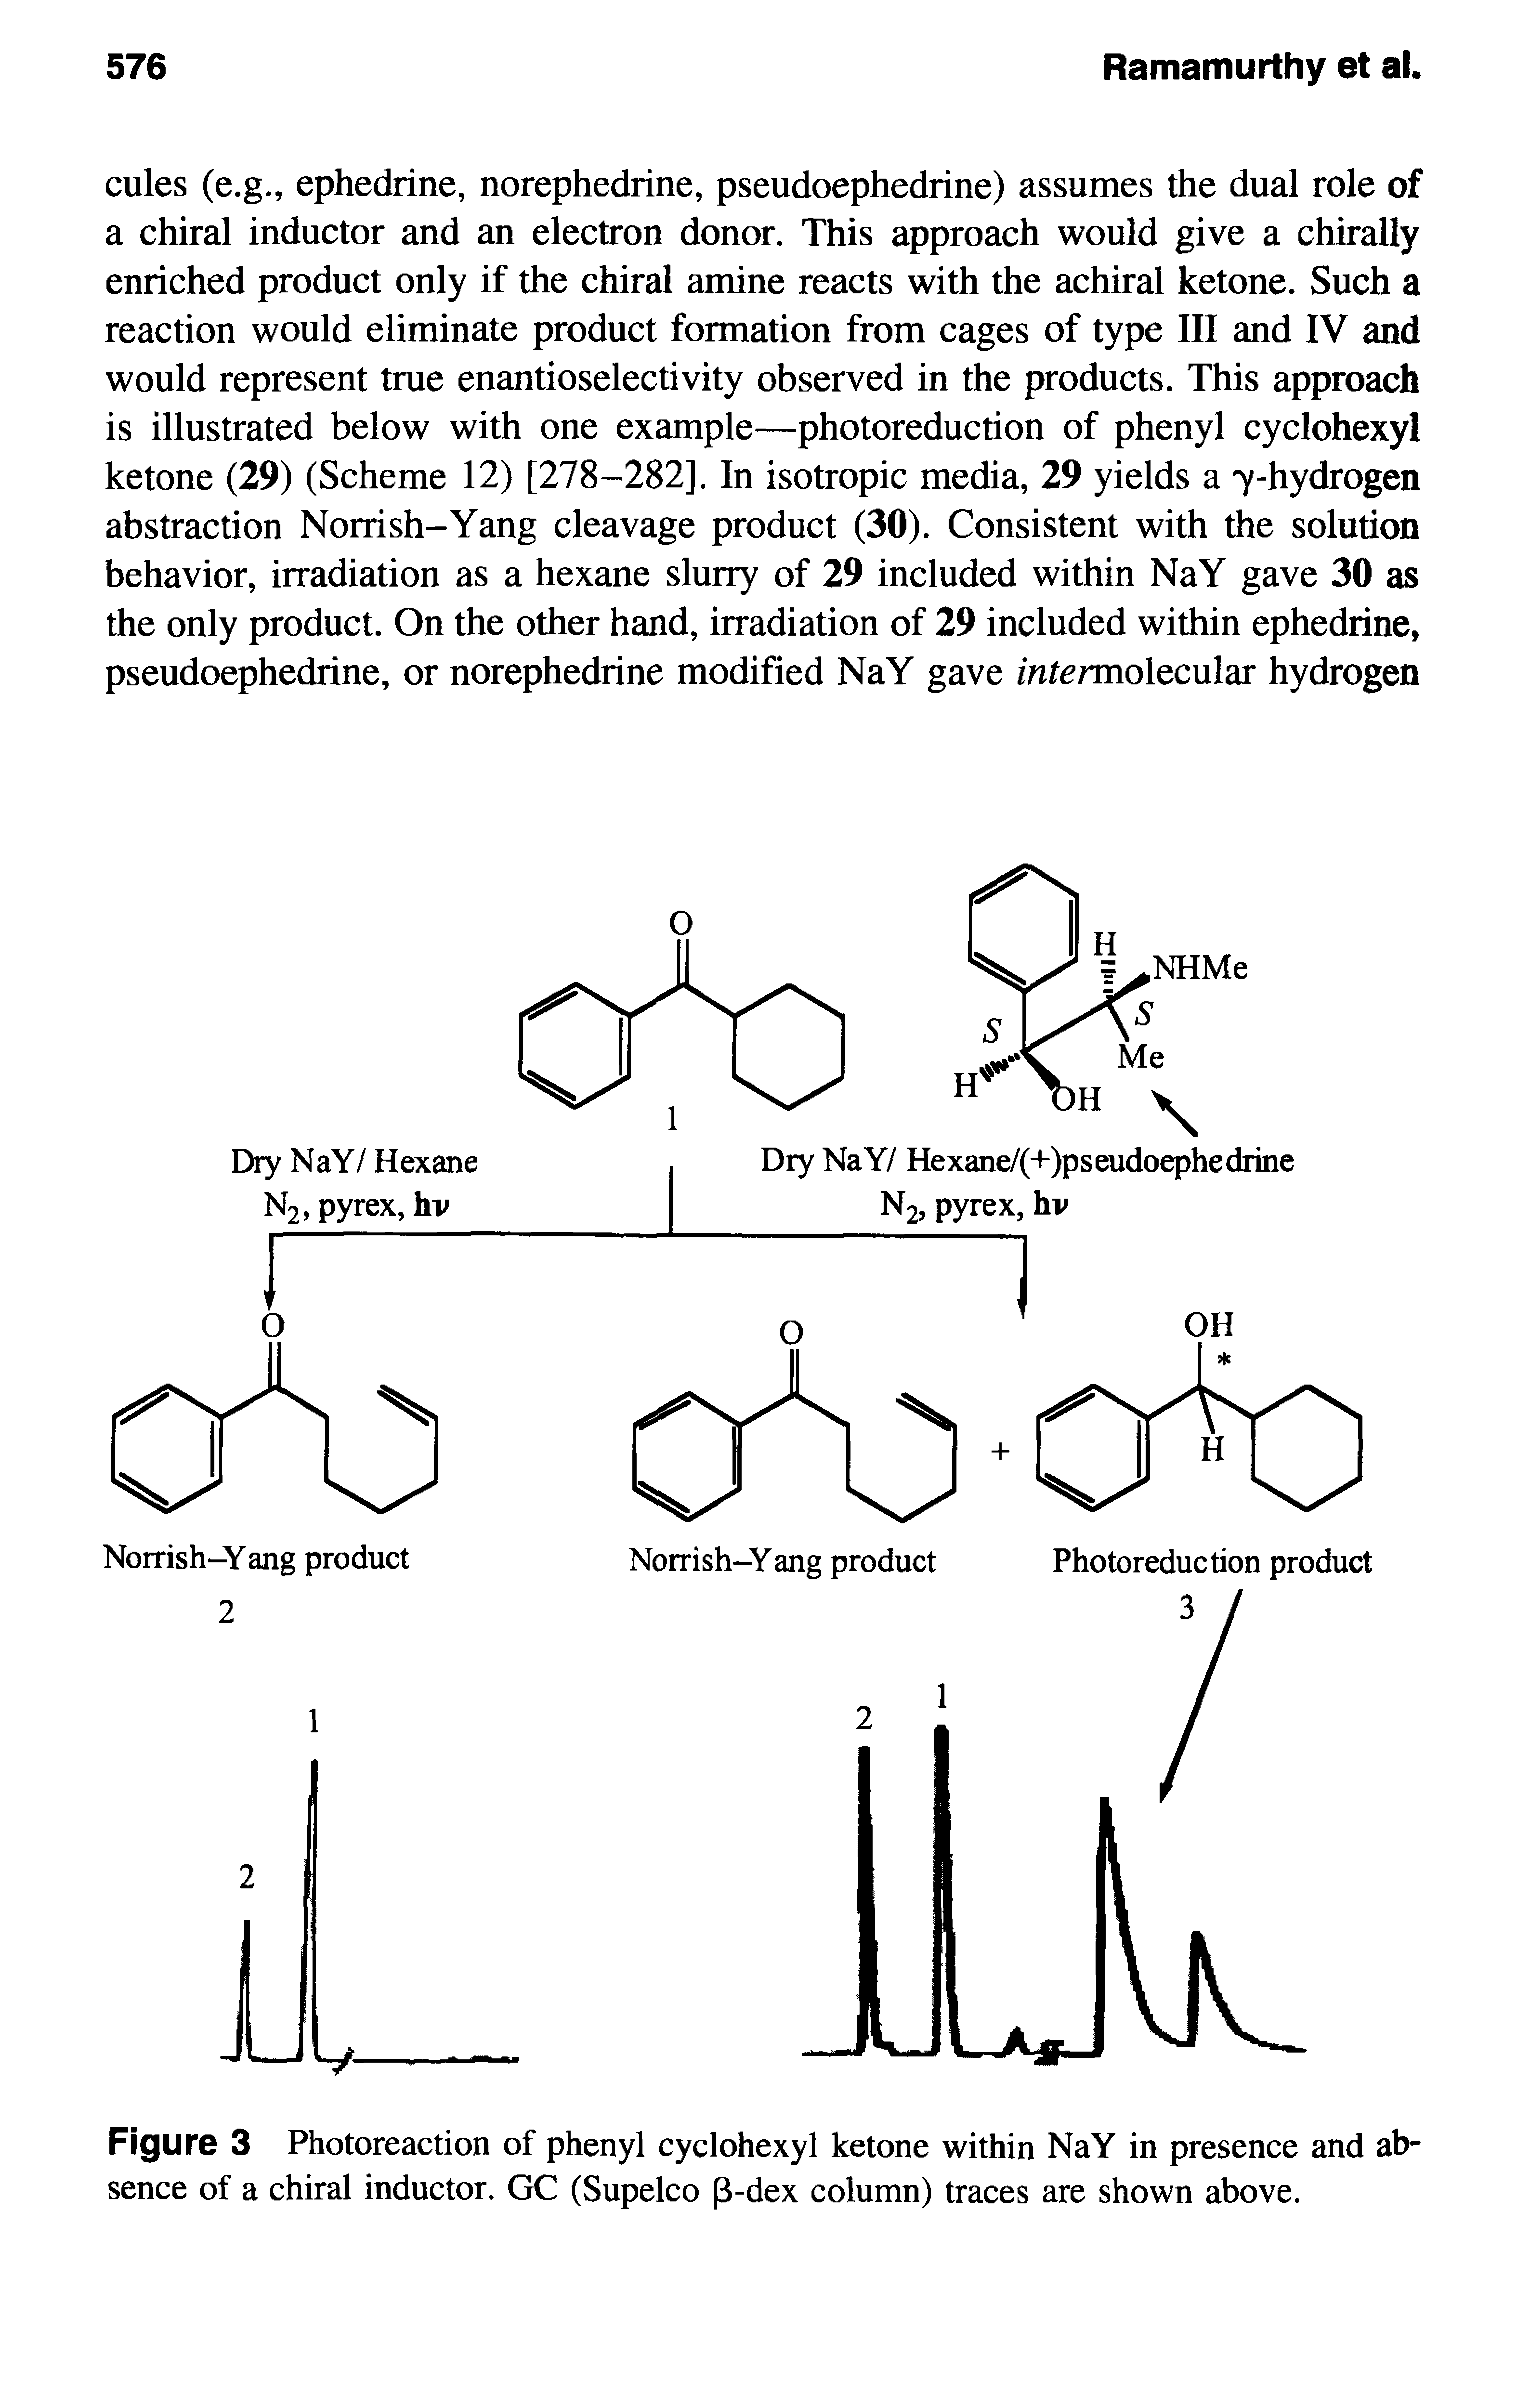 Figure 3 Photoreaction of phenyl cyclohexyl ketone within NaY in presence and ab sence of a chiral inductor. GC (Supelco p-dex column) traces are shown above.